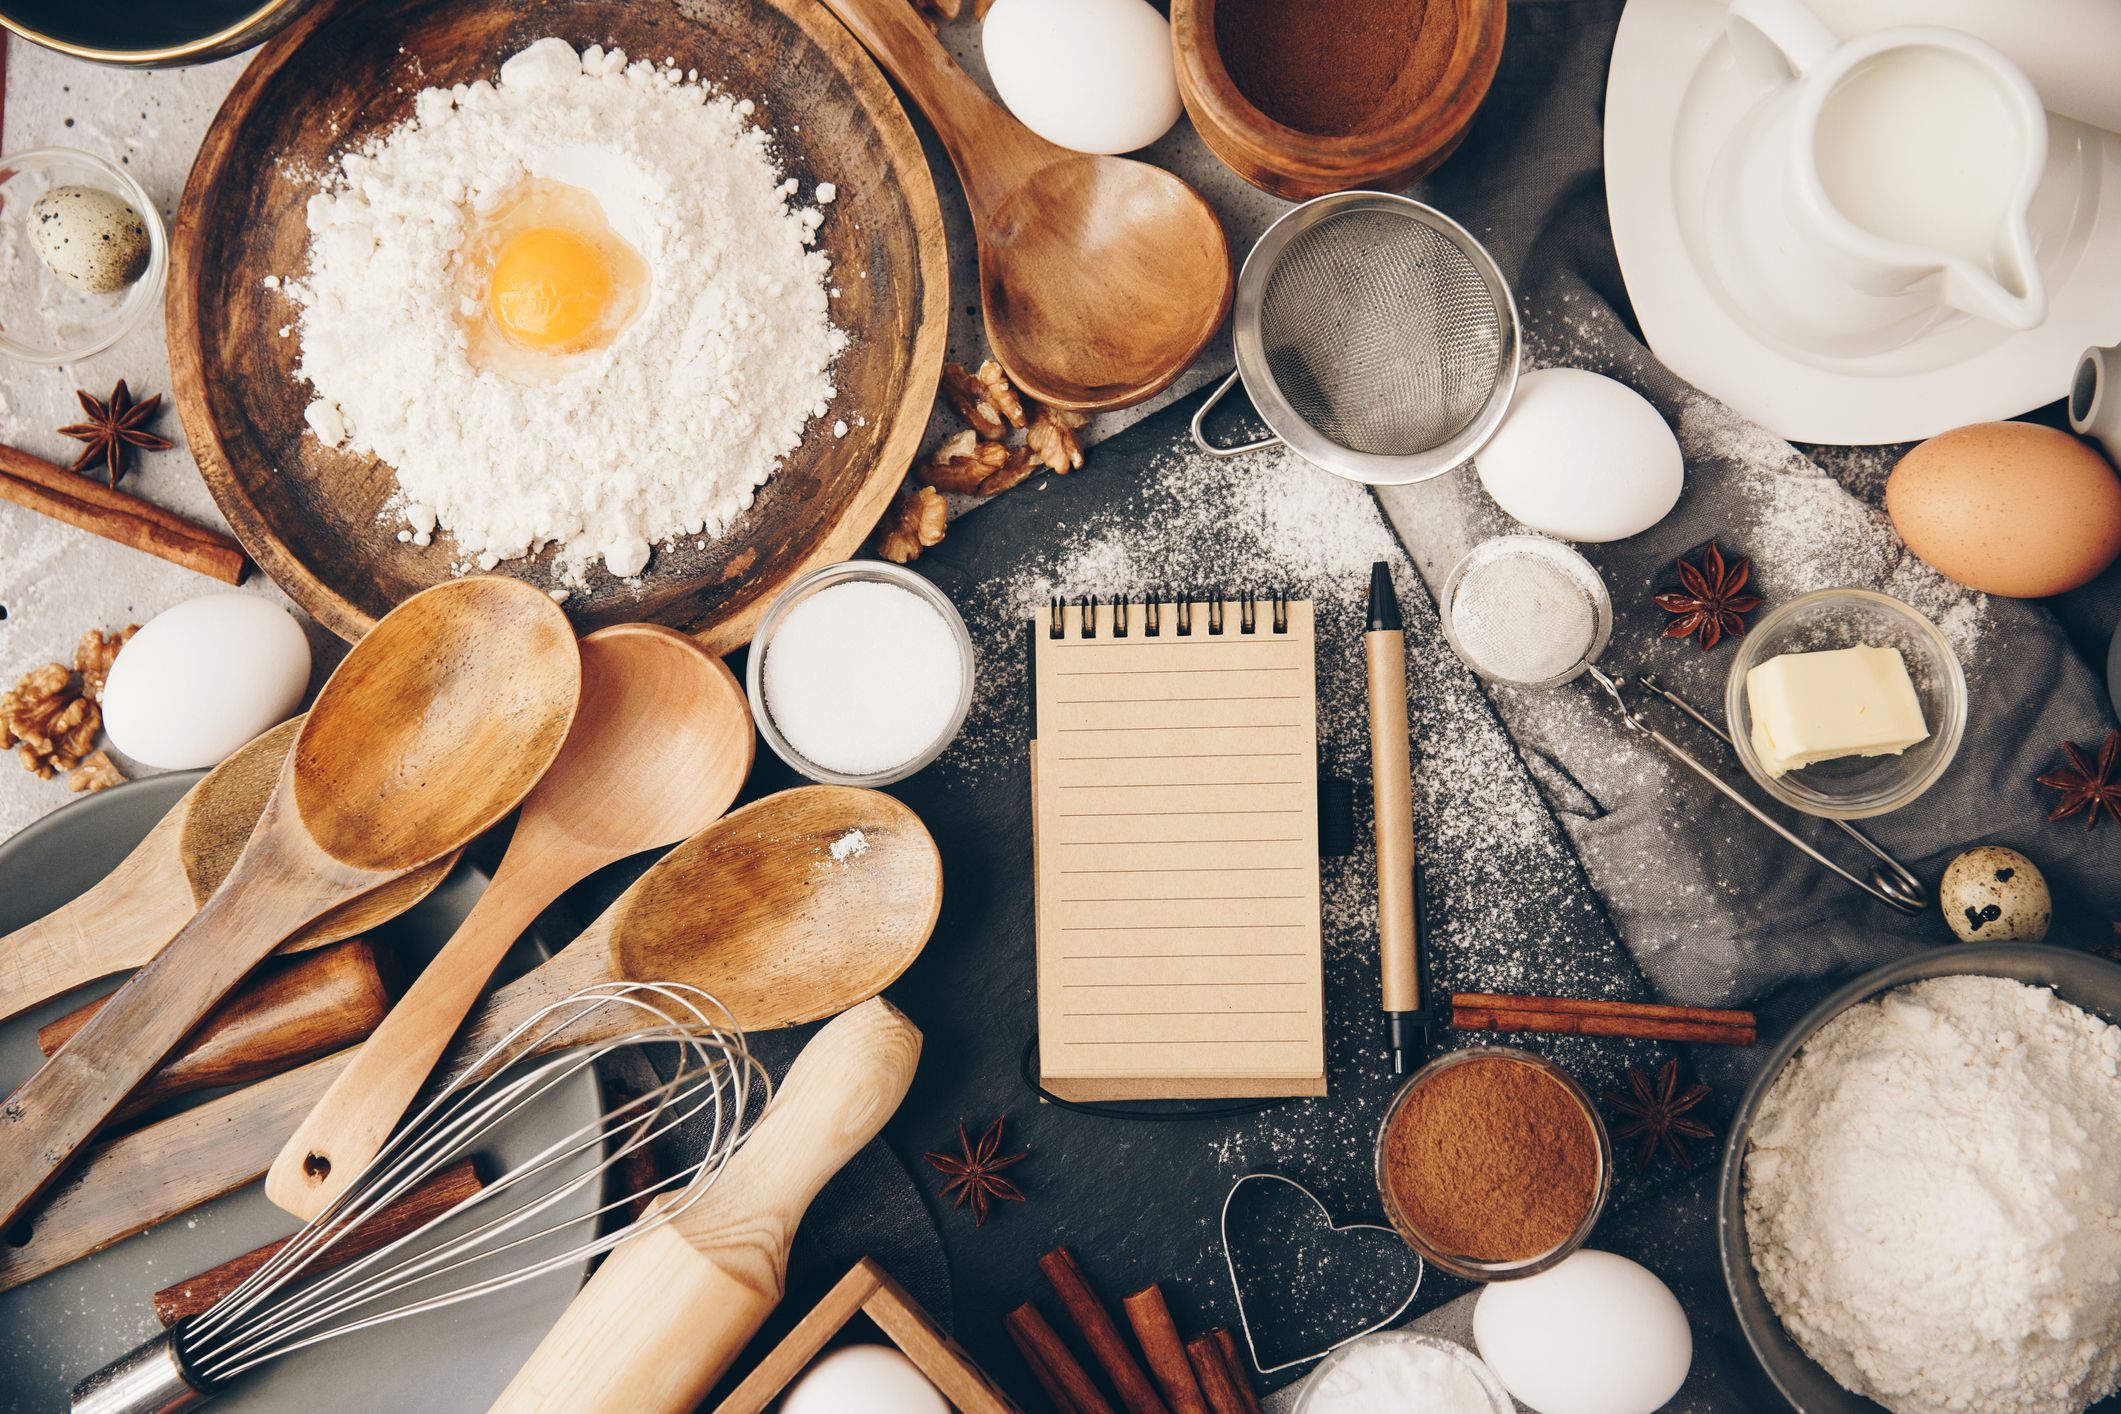 Overhead View Of Baking Ingredients And A Notepad Royalty Free Image 930086476 1546440806 